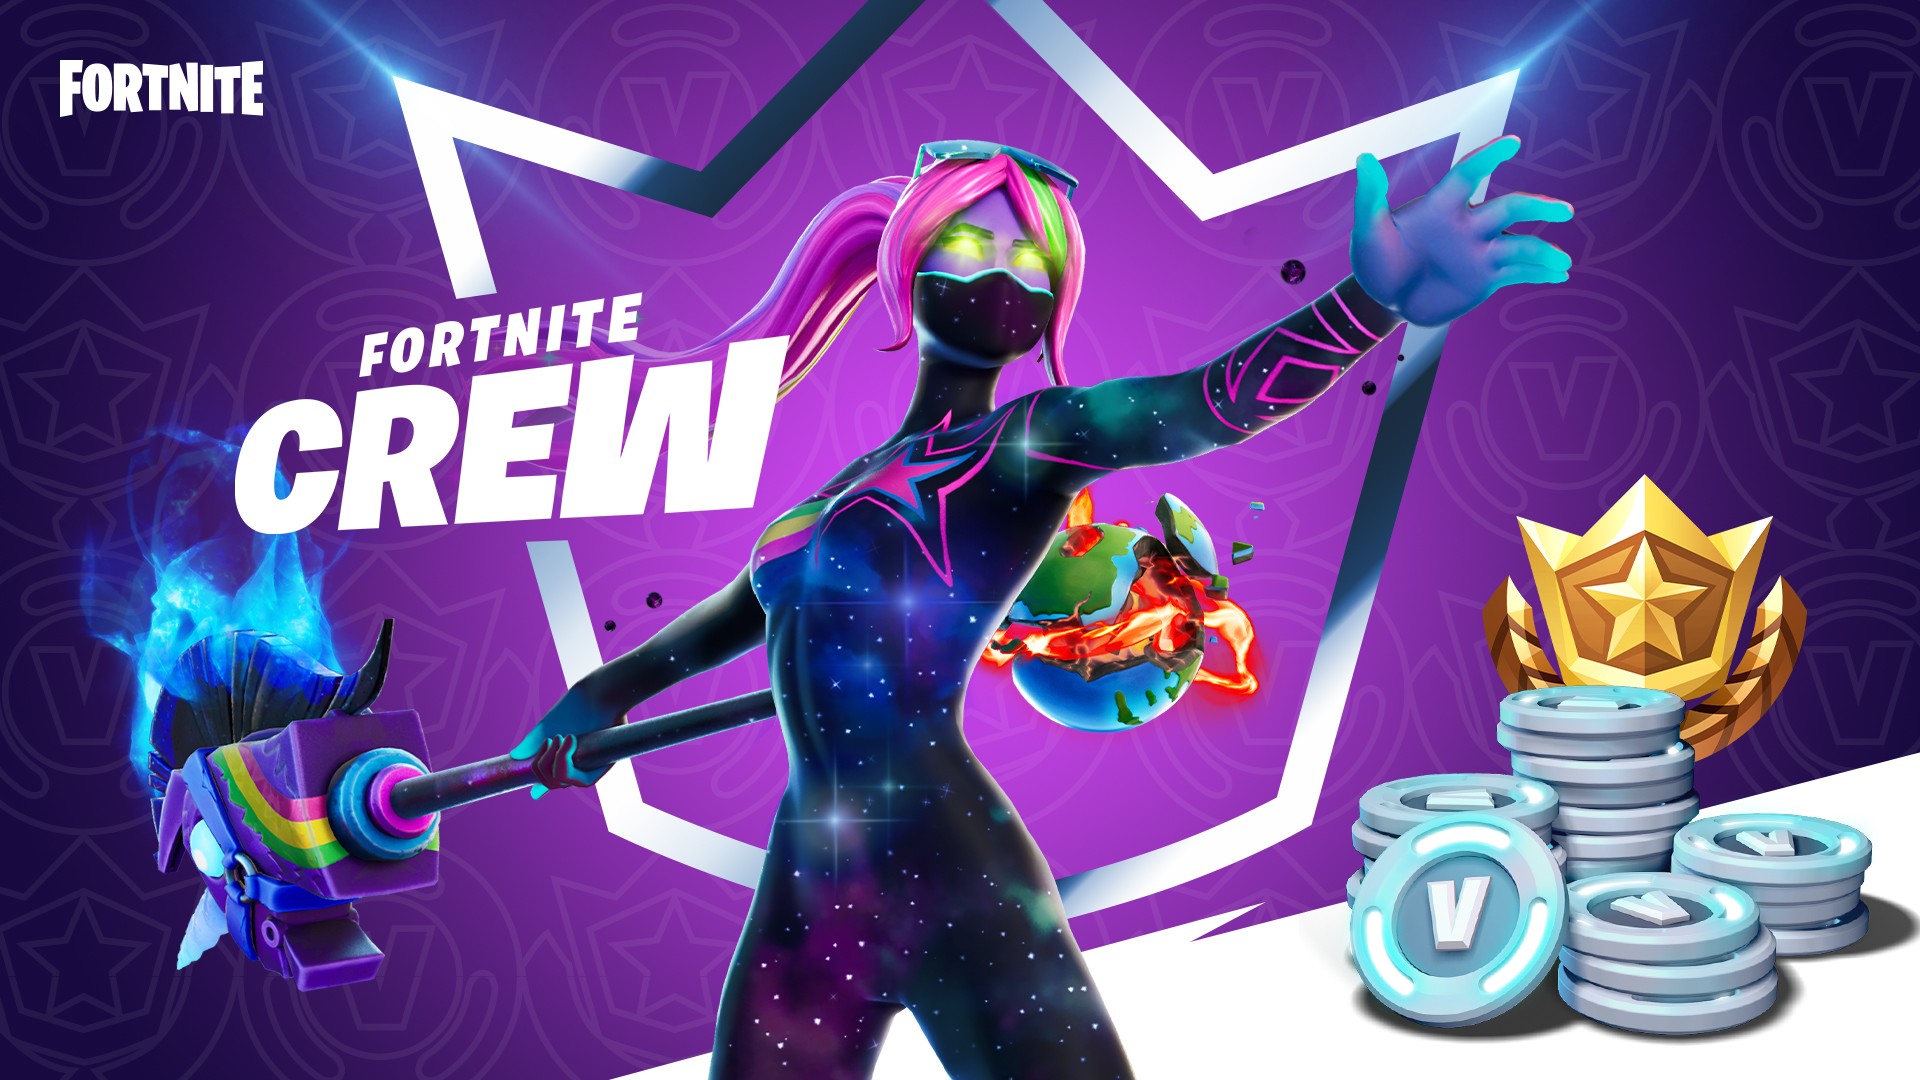 Video For Introducing Fortnite’s Crew Subscription: The Ultimate Offer for Can’t-Miss Fortnite Content